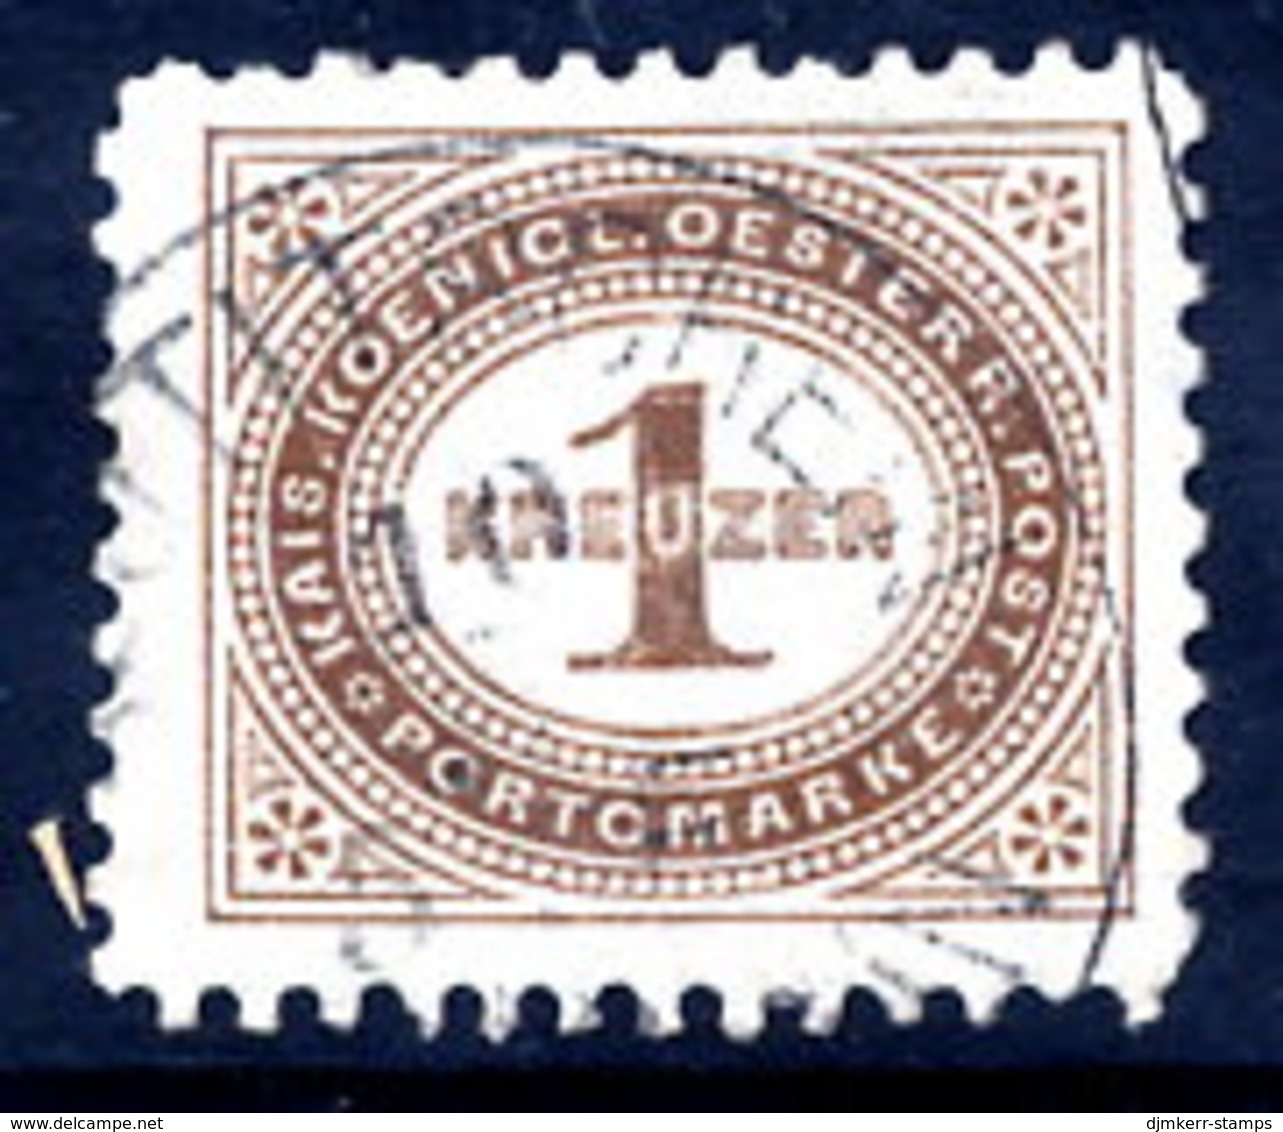 AUSTRIA  1894 Postage Due 1 Kr.  Perf. 11 Used.  Michel/ANK 1C Cat. €40 - Postage Due